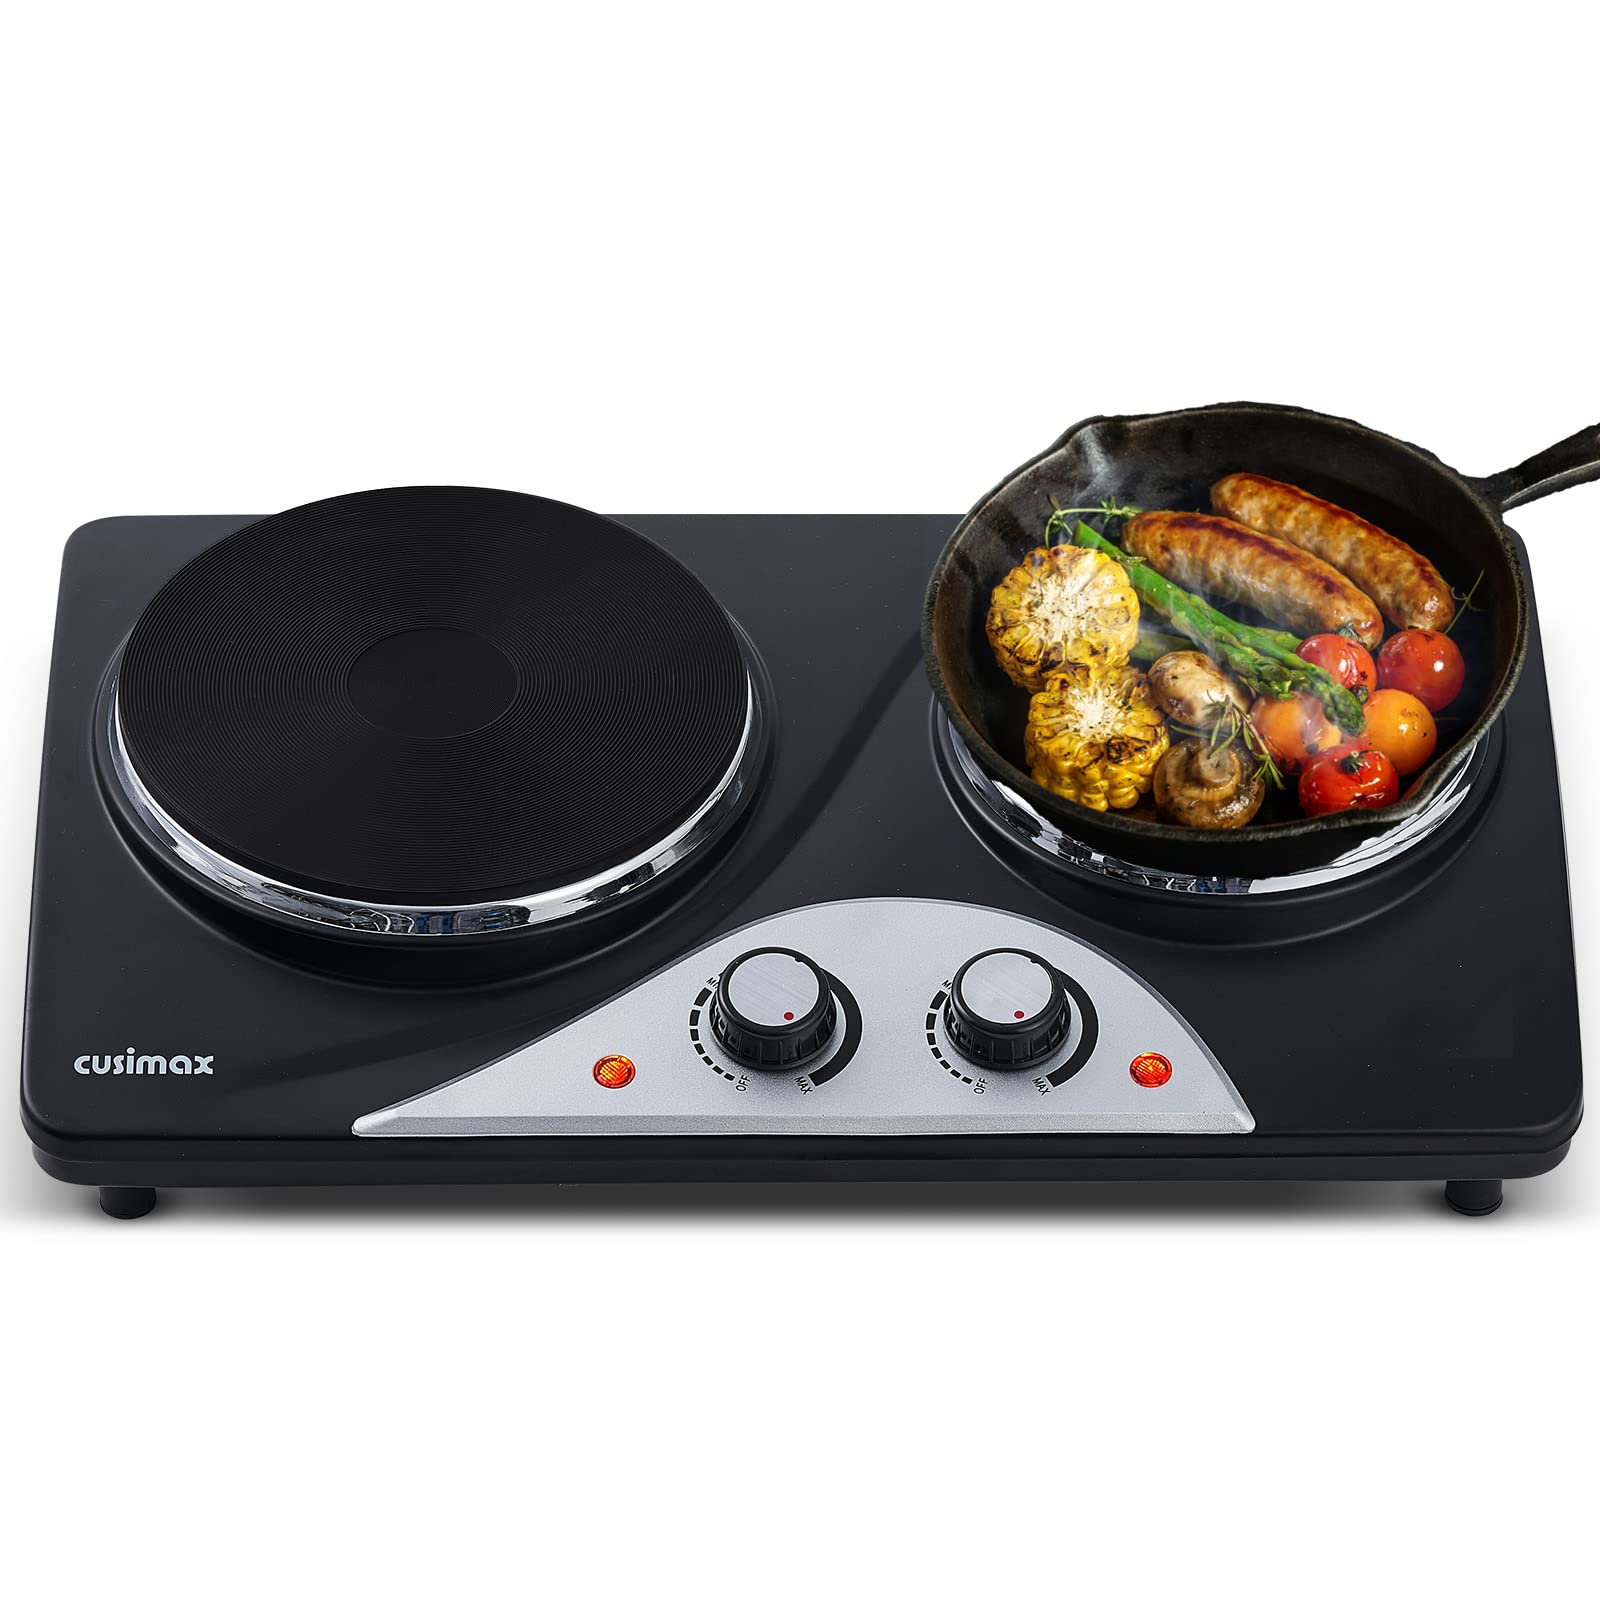 Cusimax Dual Temperature Control Stainless Steel Hot Plate(DE)